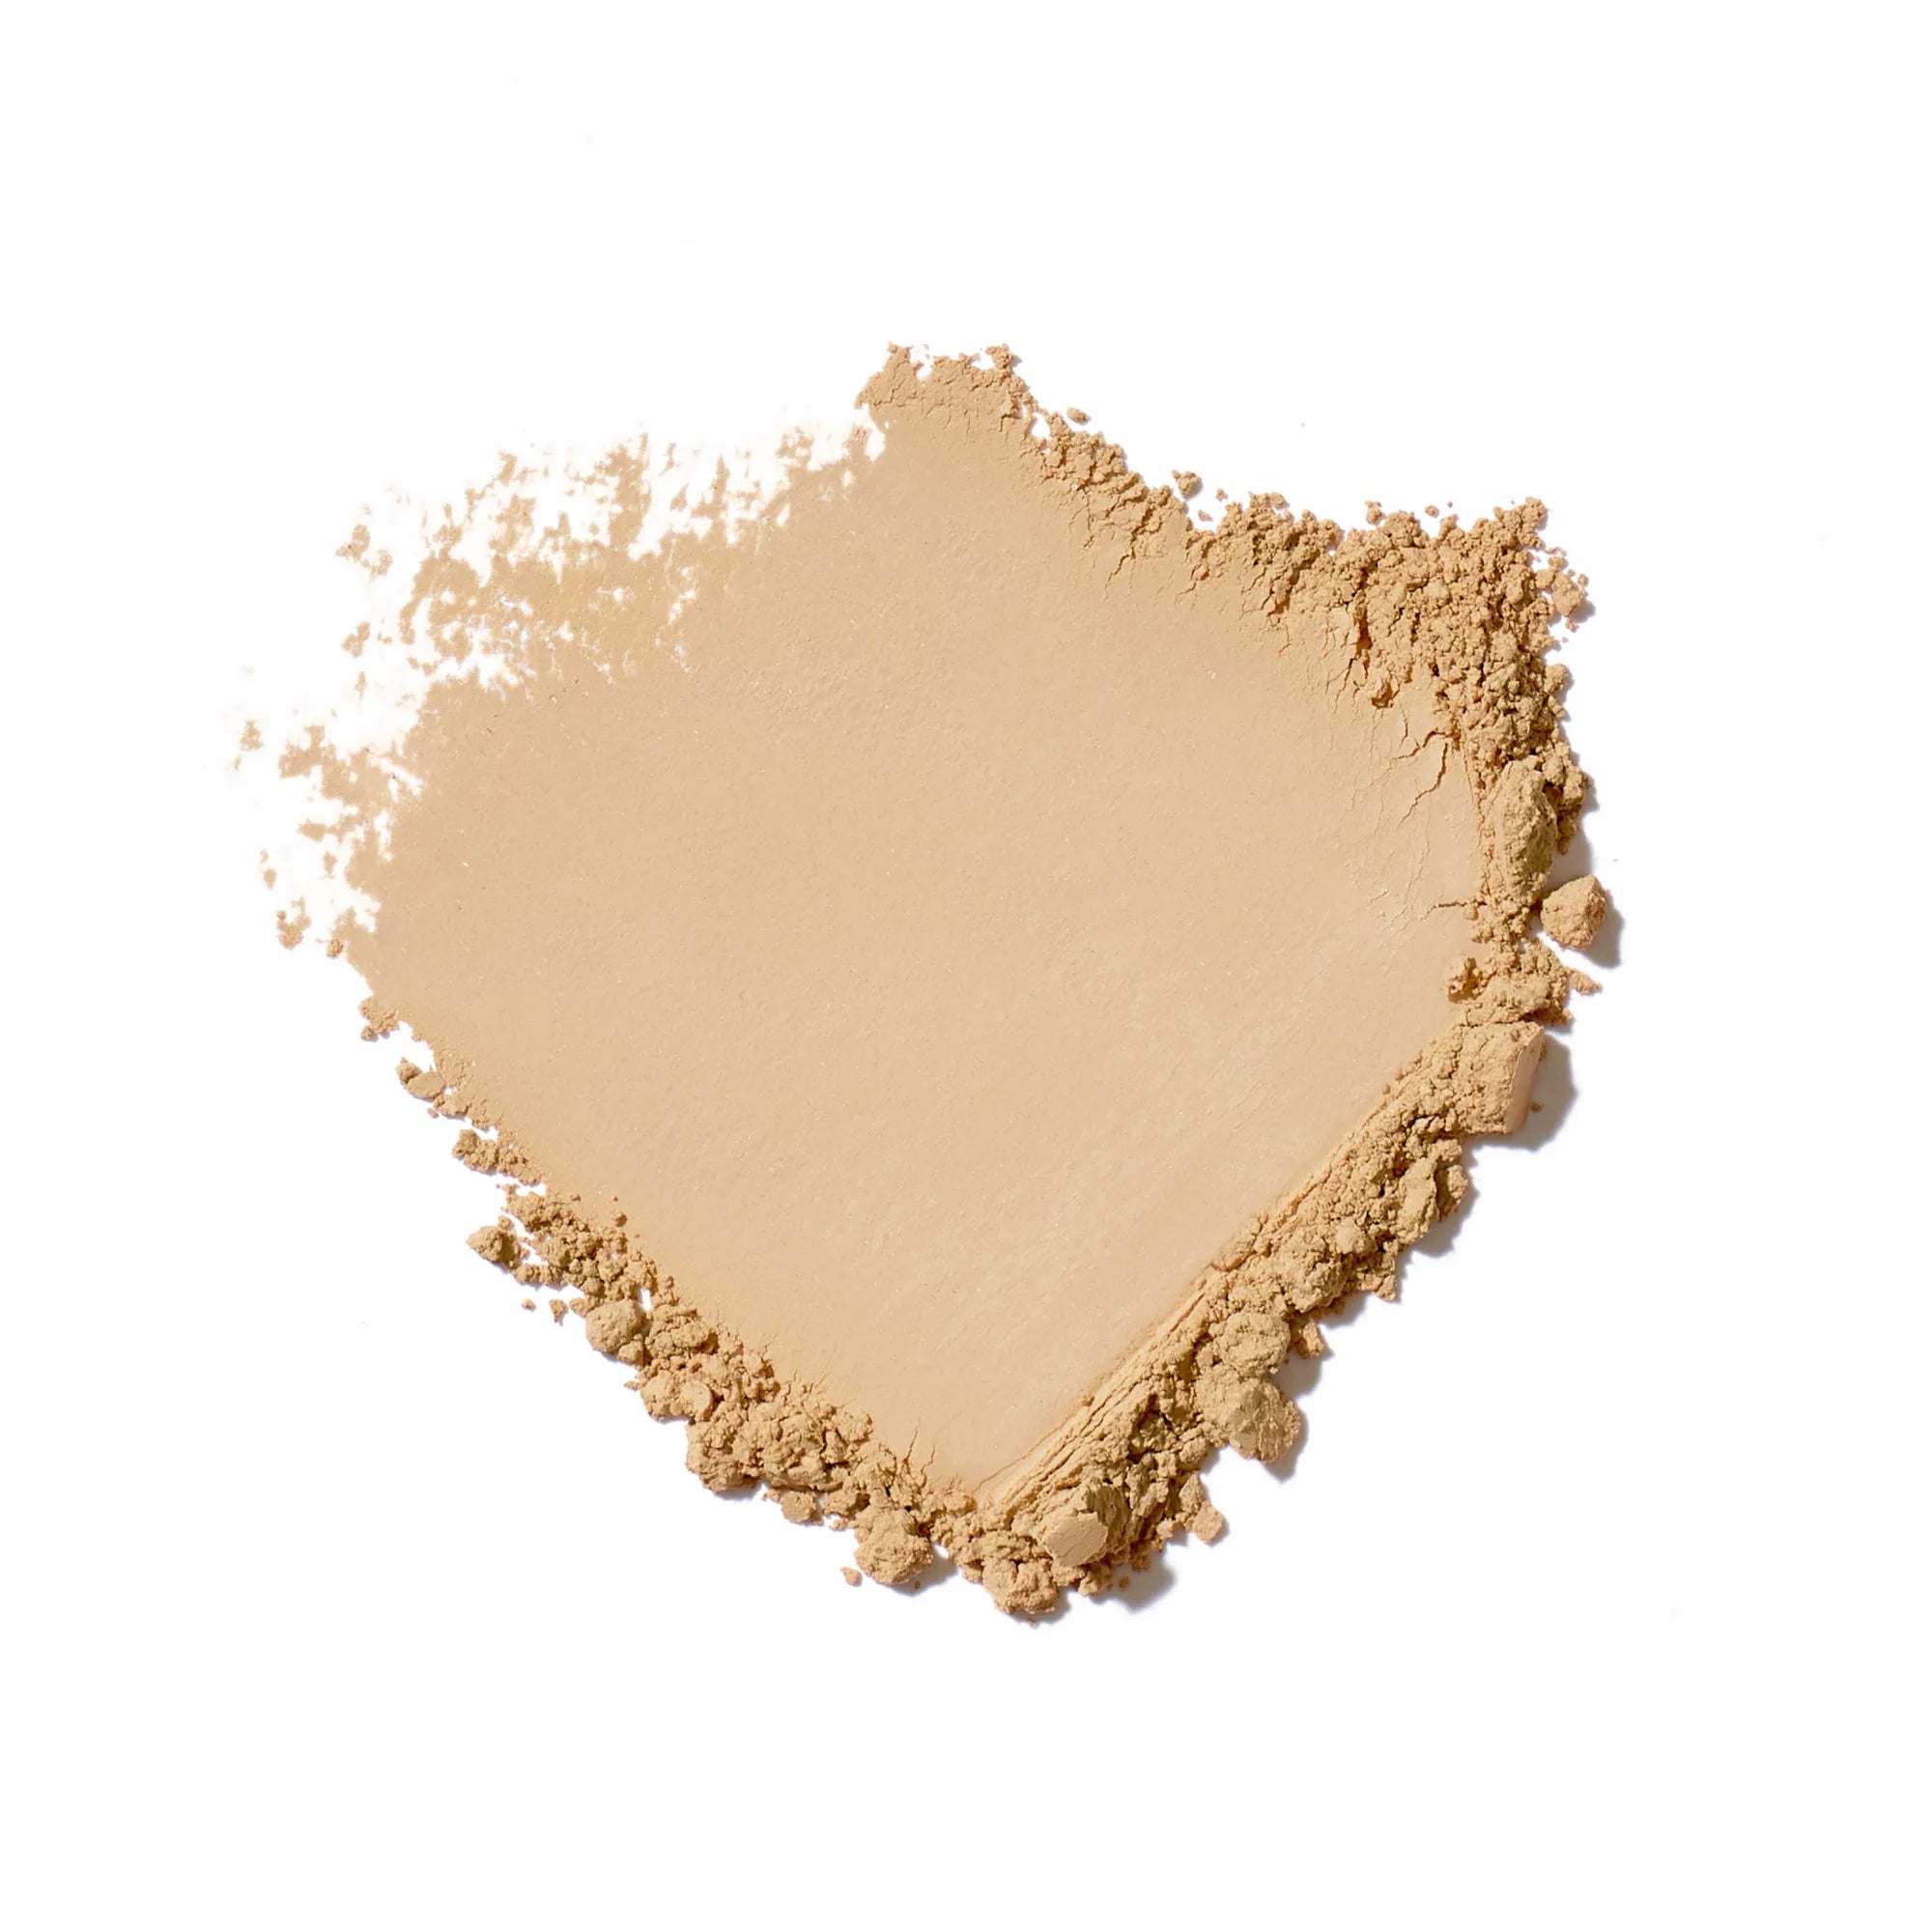 Jane Iredale's Amazing Base® Loose Mineral Powder Refill Brush - shade Warm Sienna - Medium Light with strong gold undertones